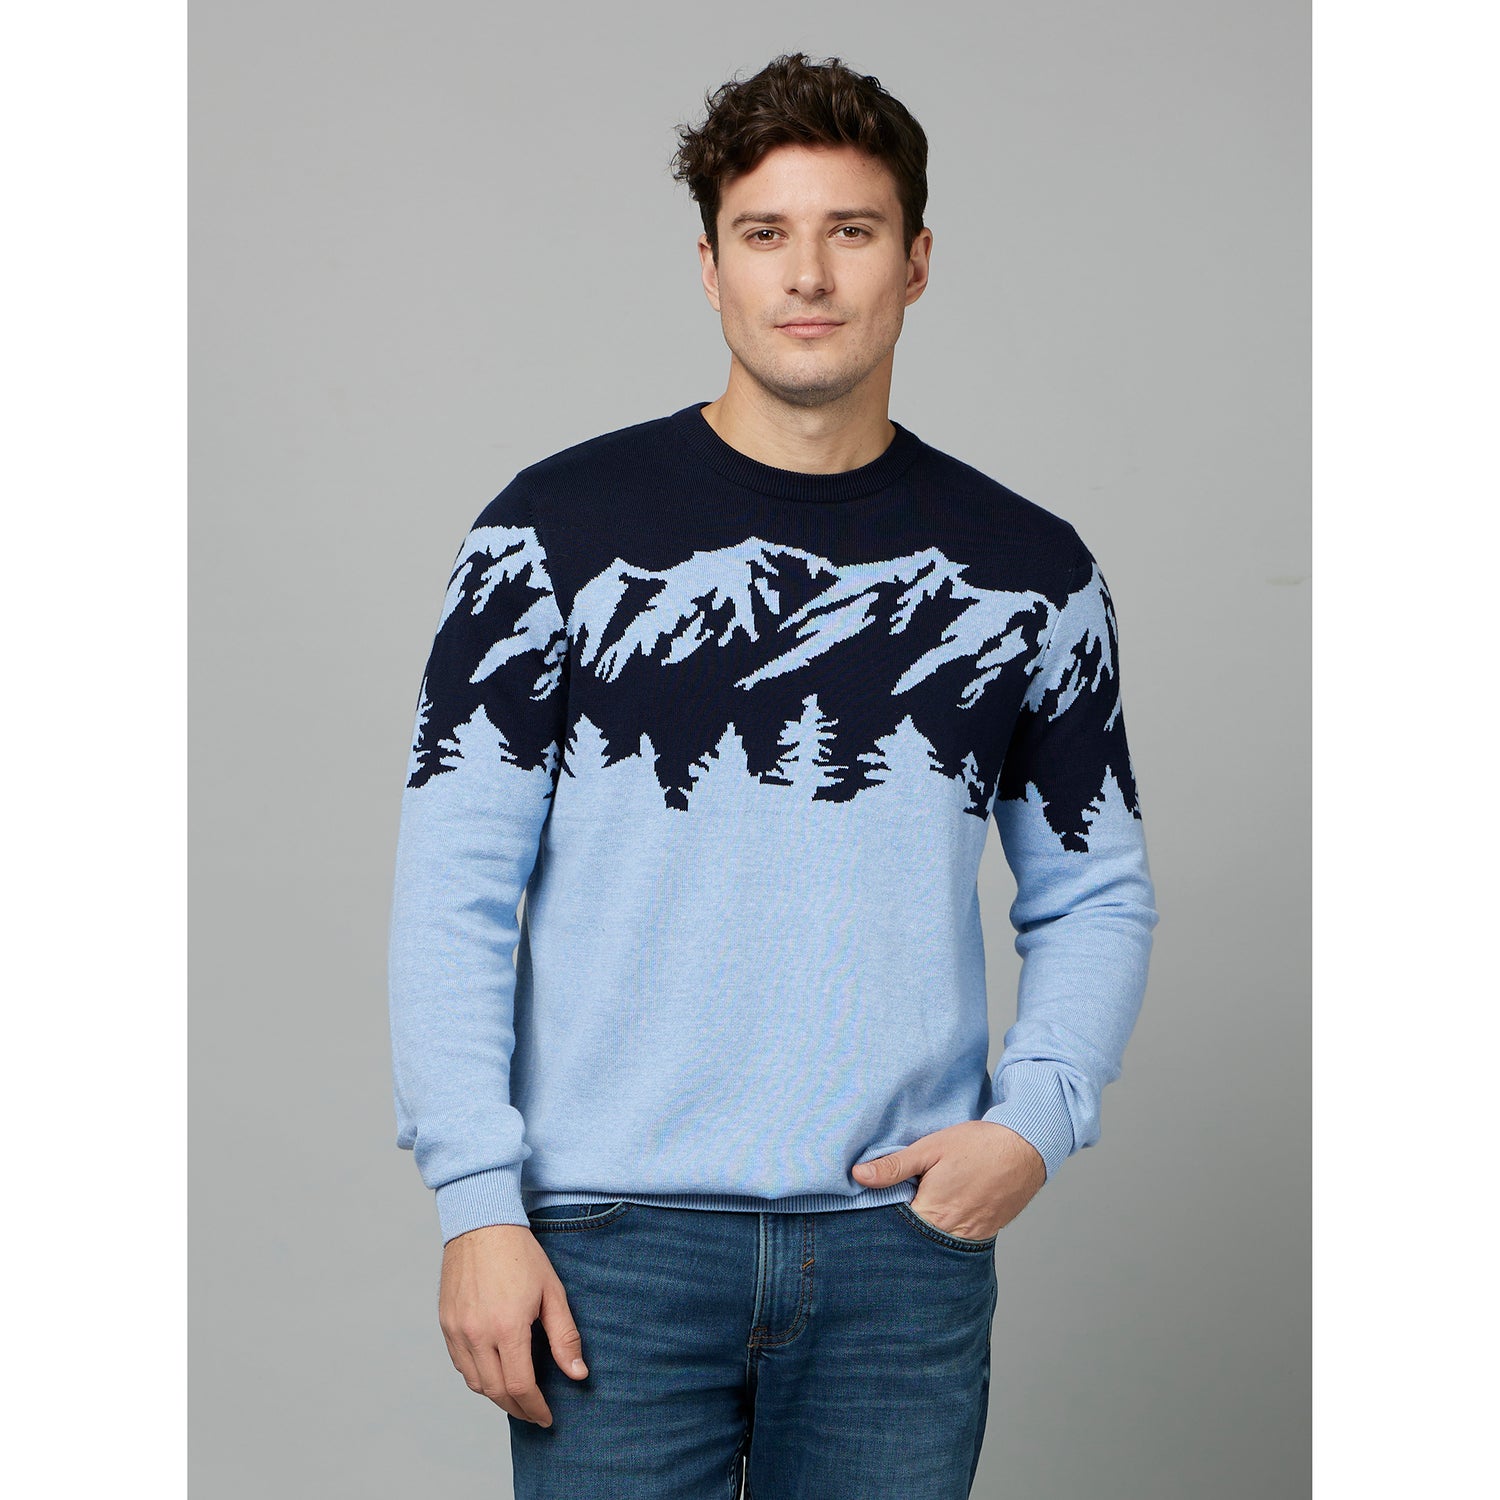 Blue Printed Full Sleeve Knitted Pullover Sweater (FEMOUNT)